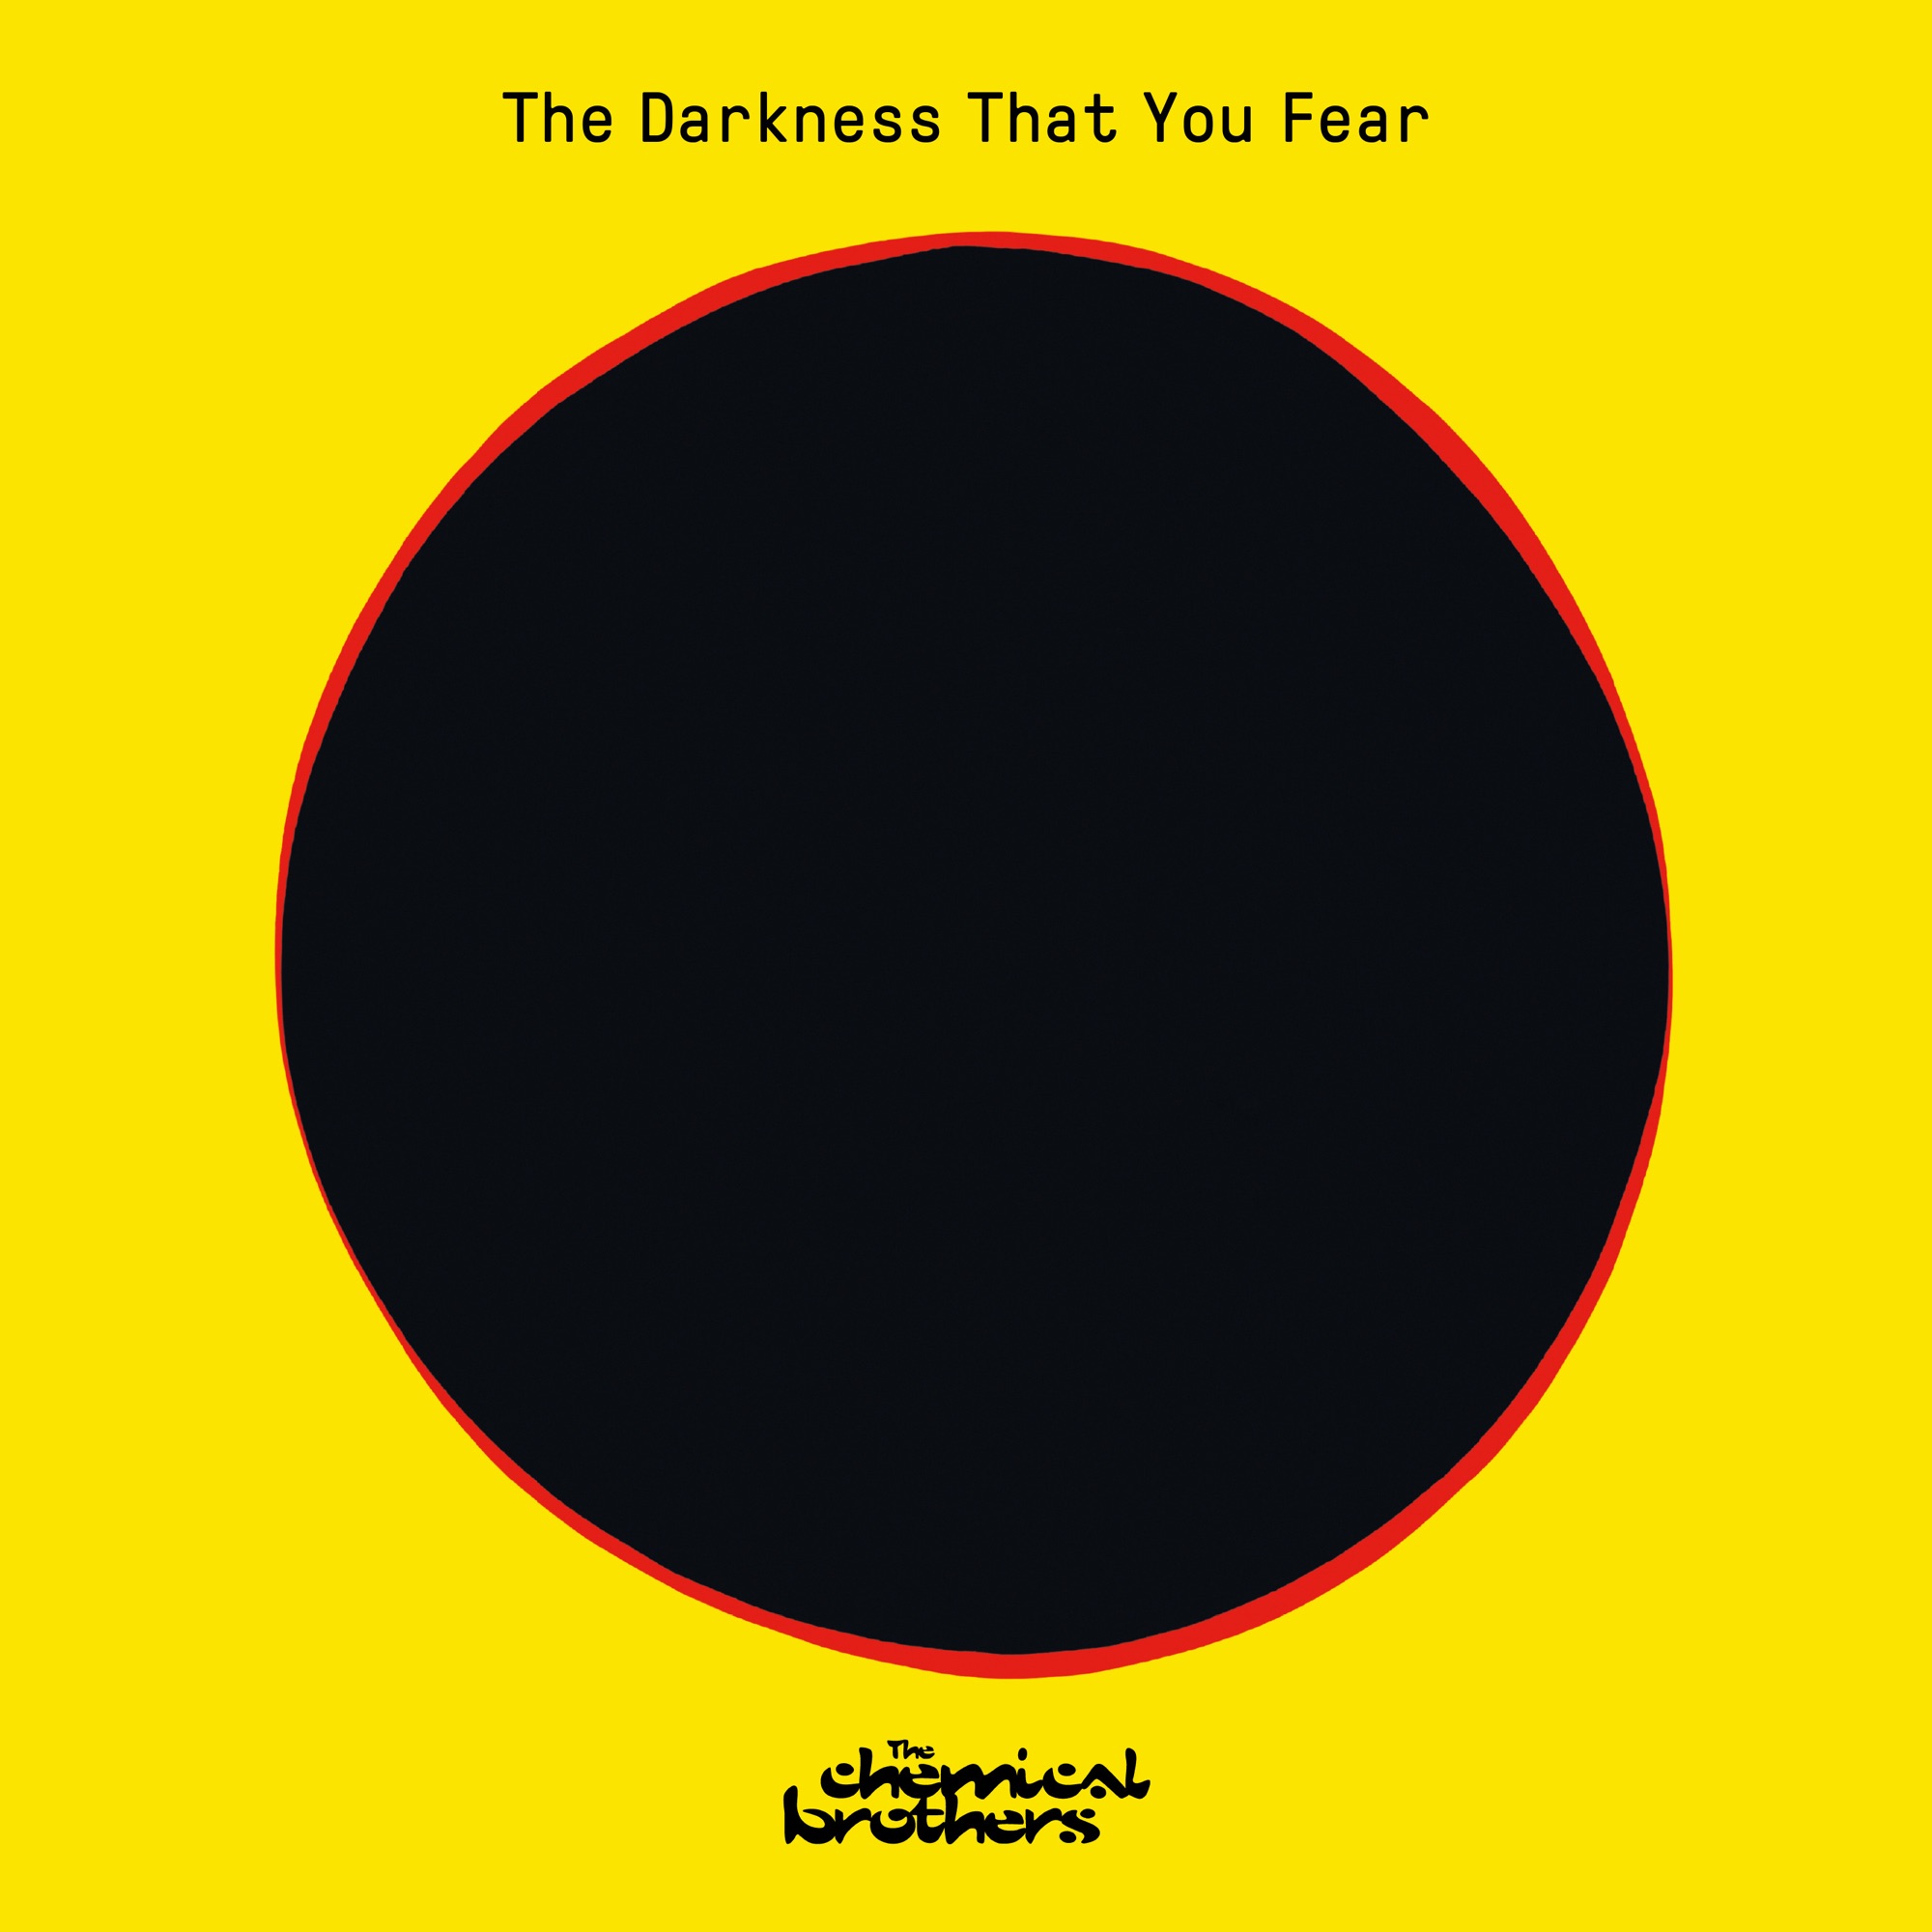 The Chemical Brothers - The Darkness That You Fear - Single